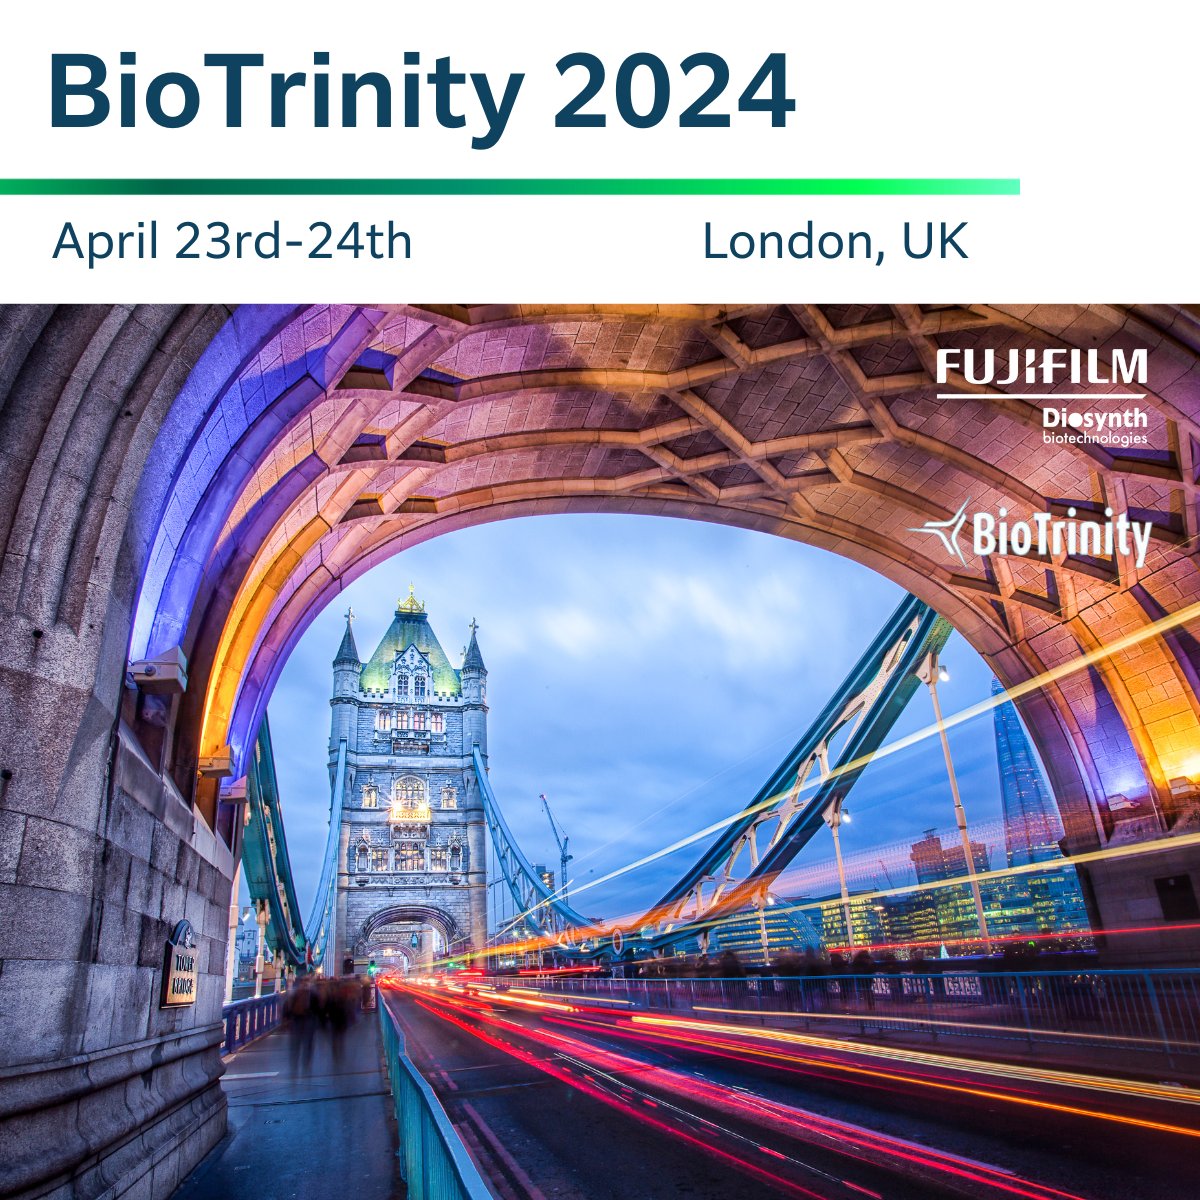 We are thrilled to announce our participation at BioTrinity on April 23-24, 2024, in London at Convene, 133 Houndsditch. Stop by our booth to discover how FUJIFILM Diosynth Biotechnologies can help you advance and deliver tomorrow's medicines. #BioTrinity #Biotech